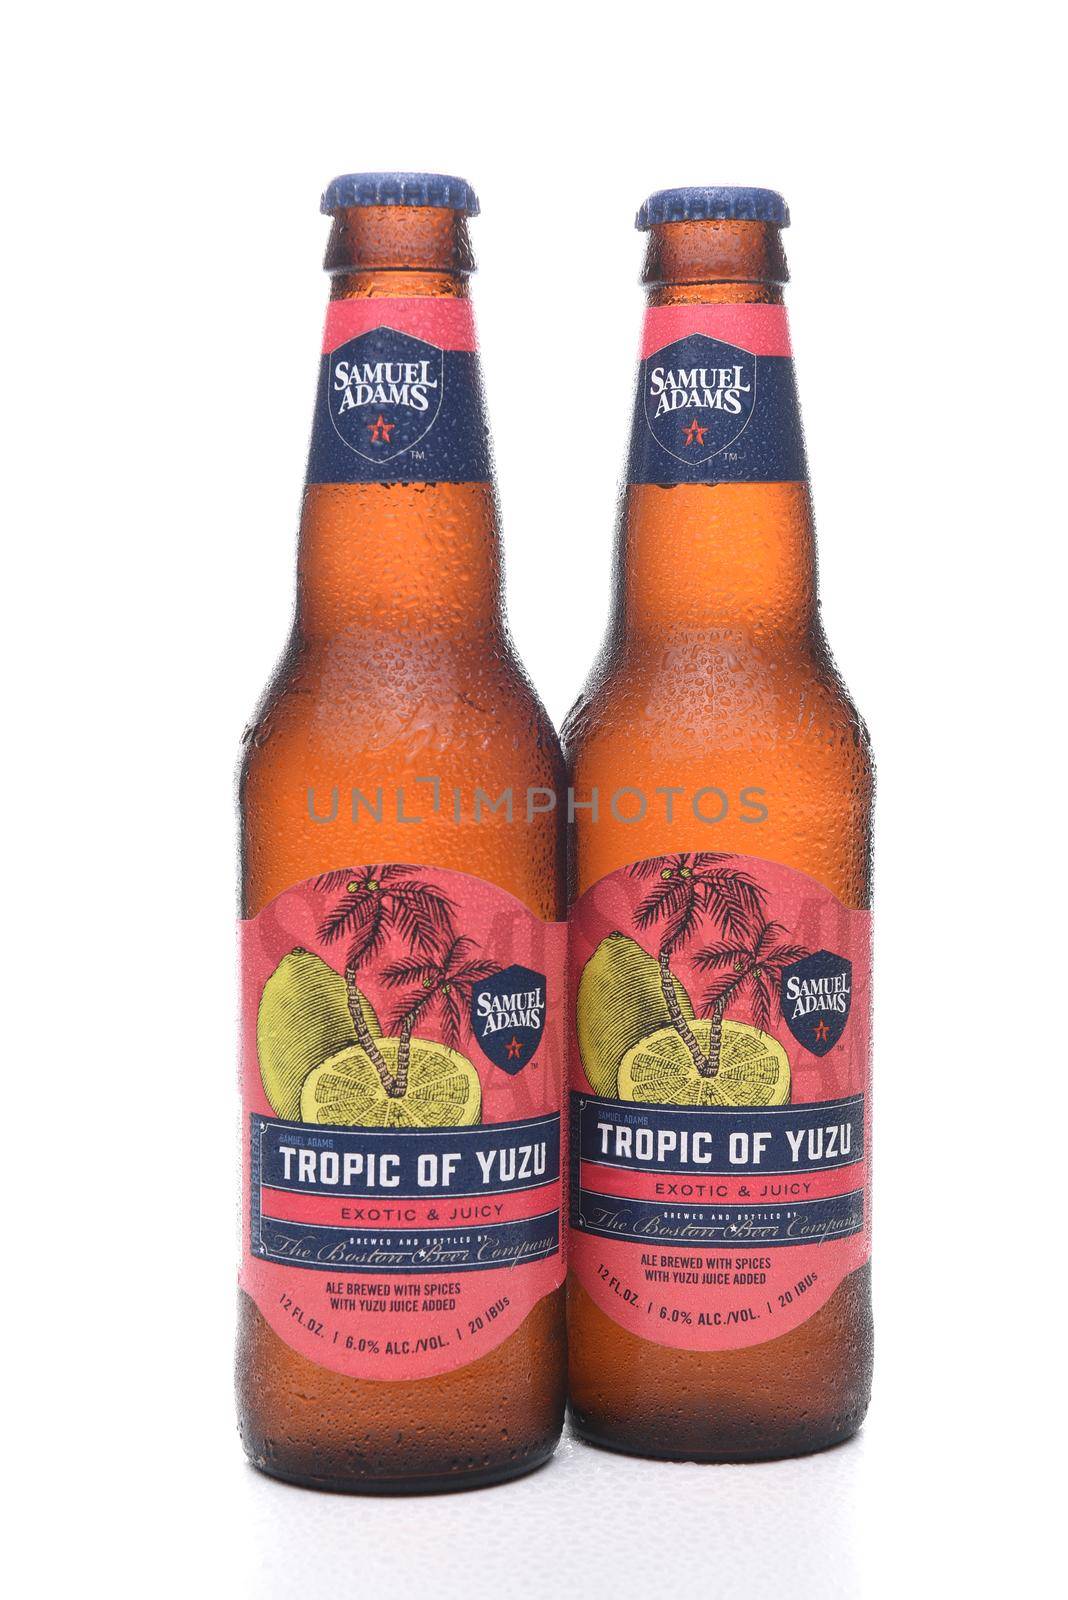 IRVINE, CA - JULY 16, 2017: Samuel Adams Tropic of Yuzu two bottles. From the Boston Beer Company. Based on sales in 2016, it is the second largest craft brewery in the U.S.